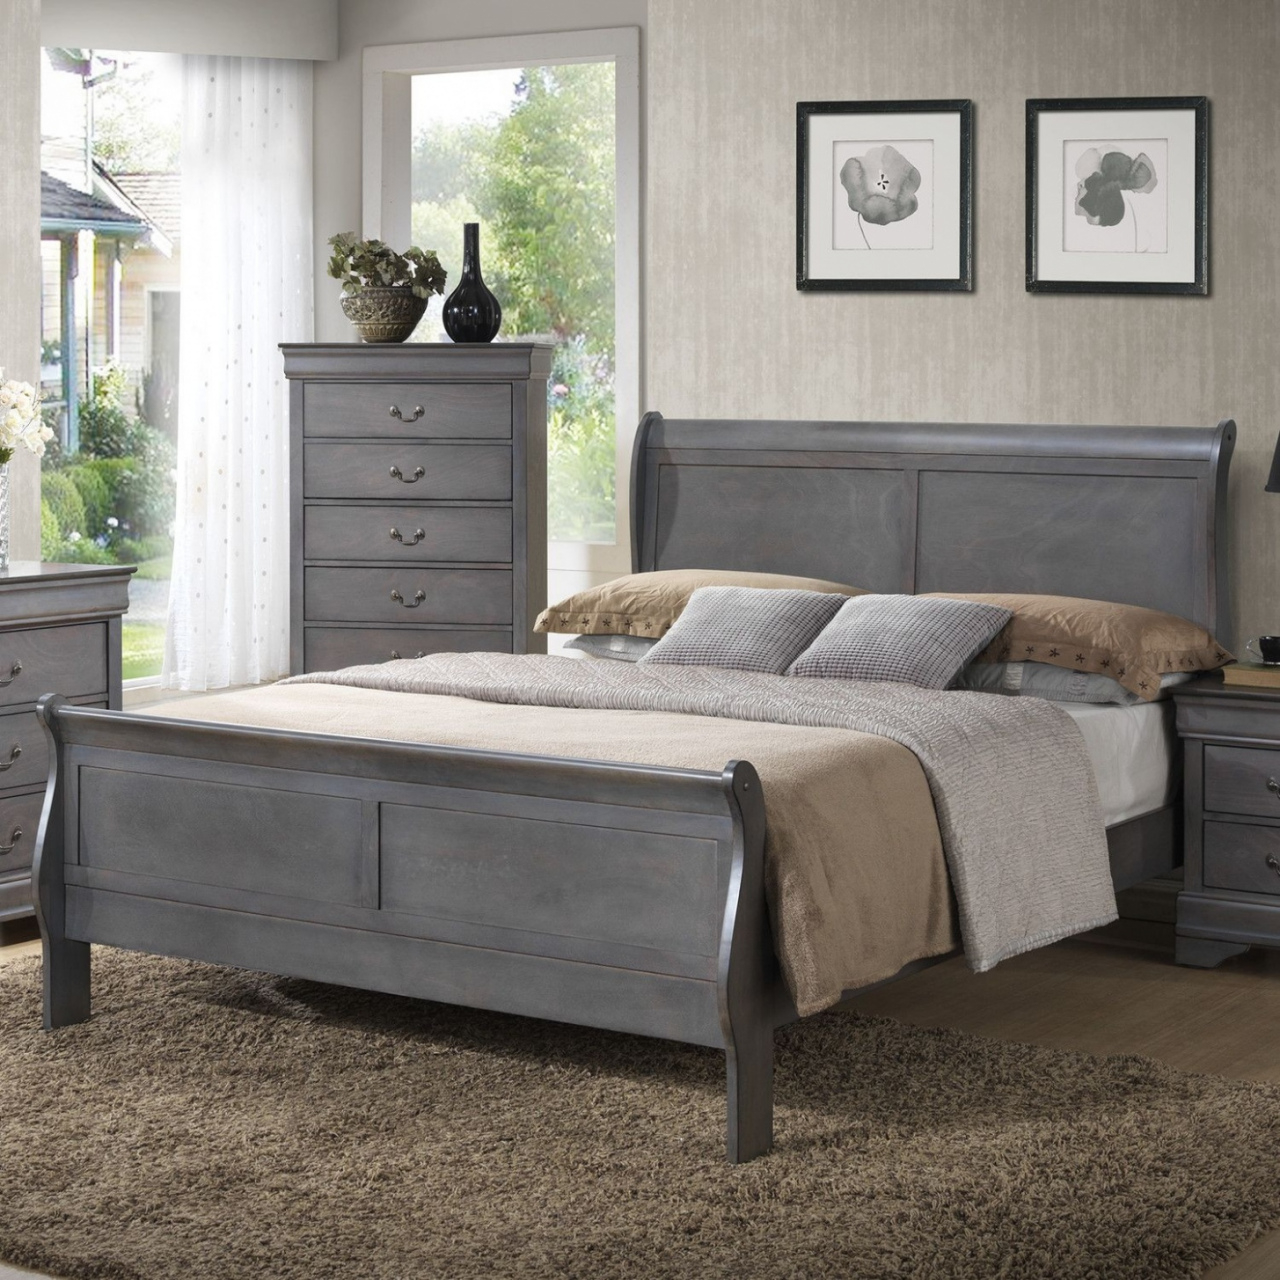 Weathered Oak Queen Bedroom Sets Queen Wood Bed Frame Rabbssteak throughout sizing 1280 X 1280